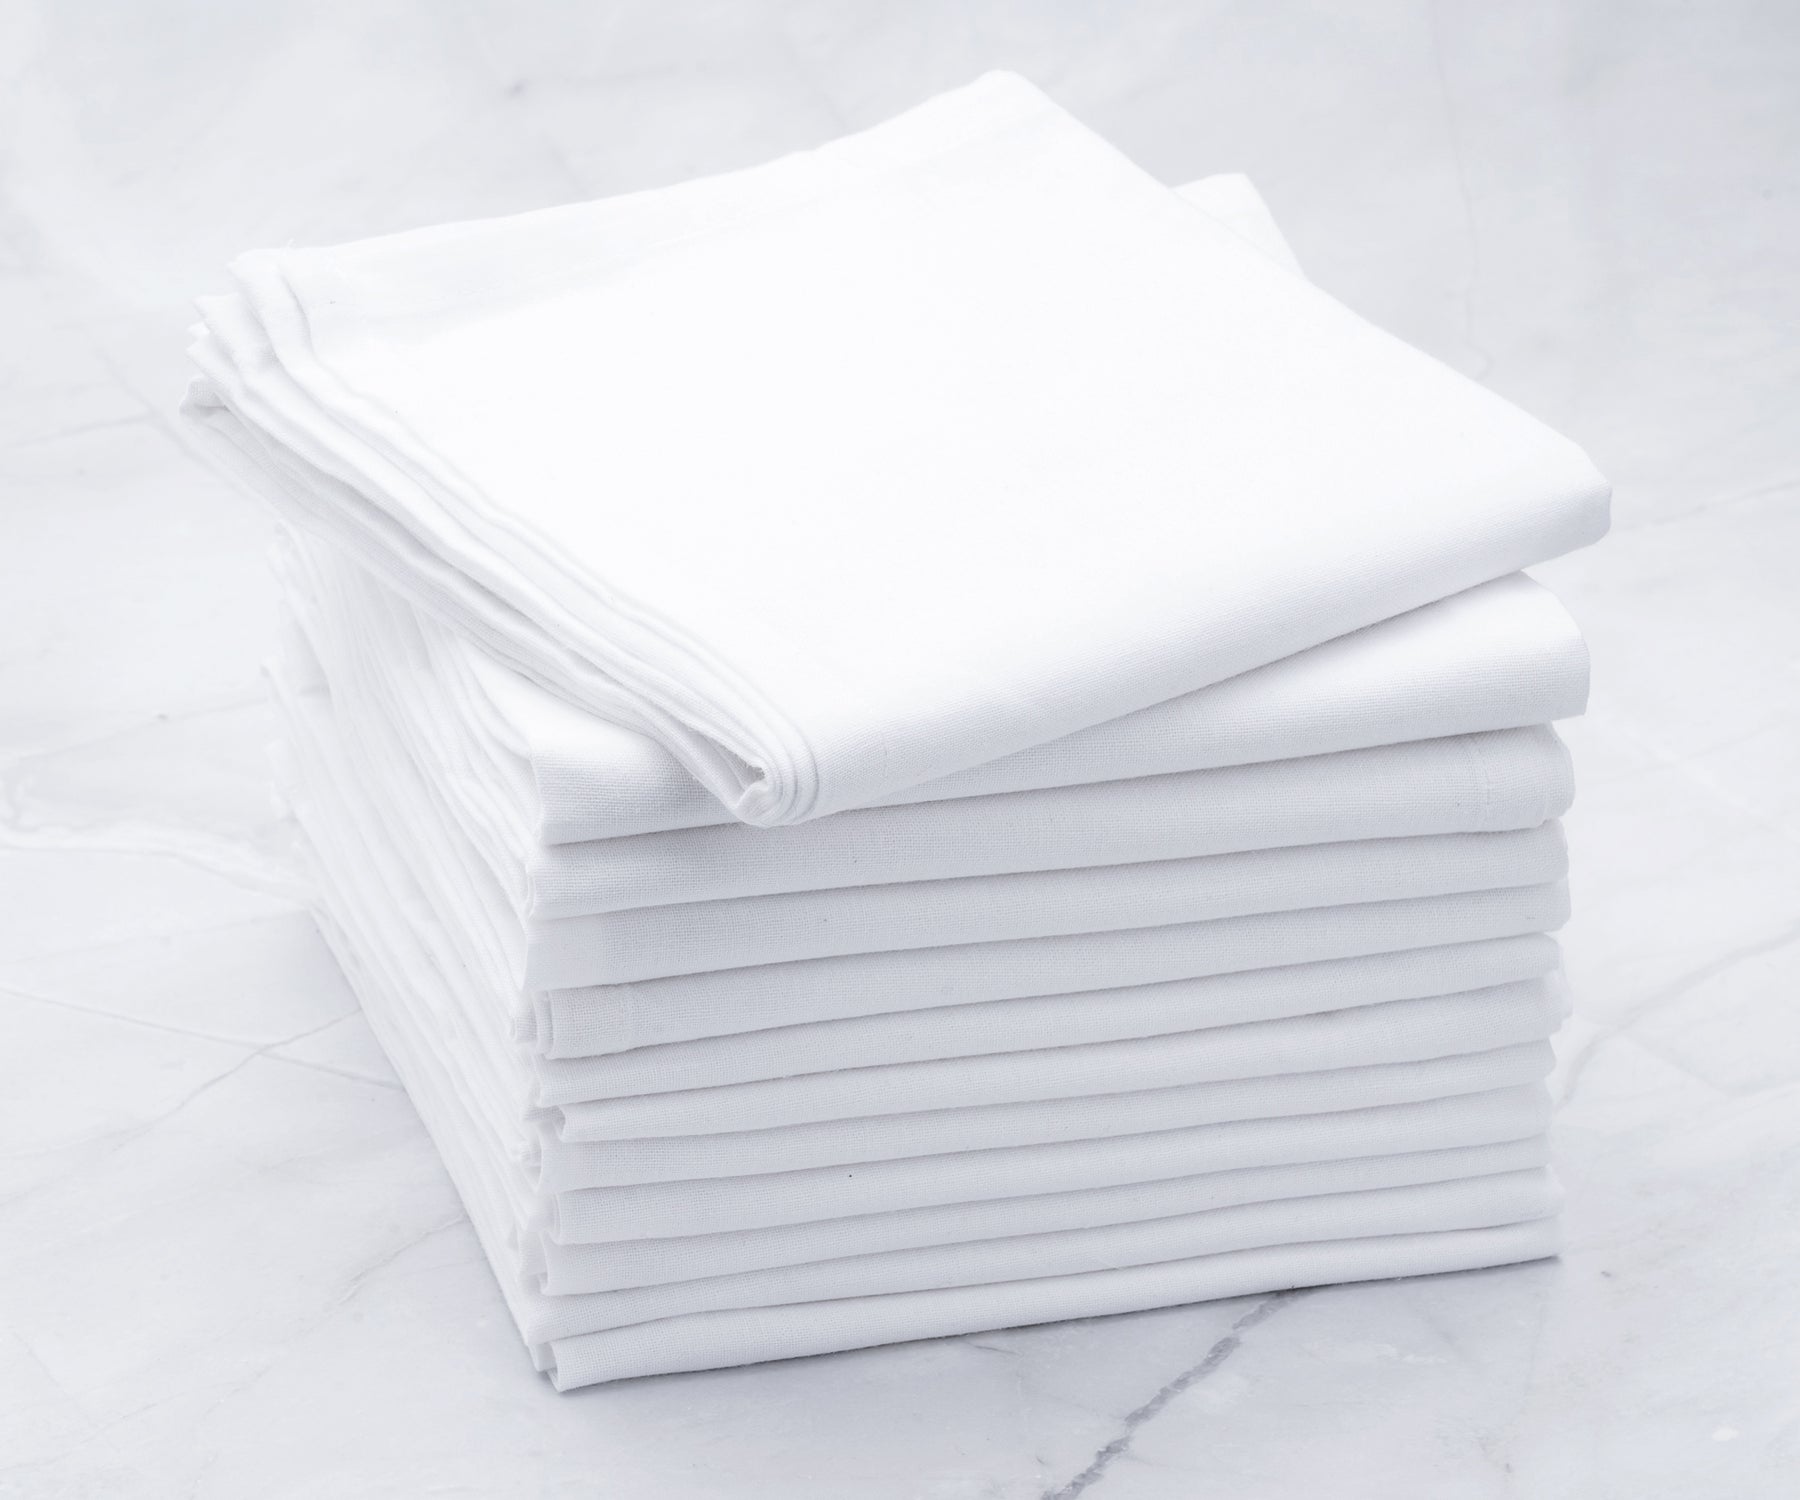 bulk tea towels set are are soft on the hands, flour sack towels white are absorbent to soak off liquids, white cloth towels.